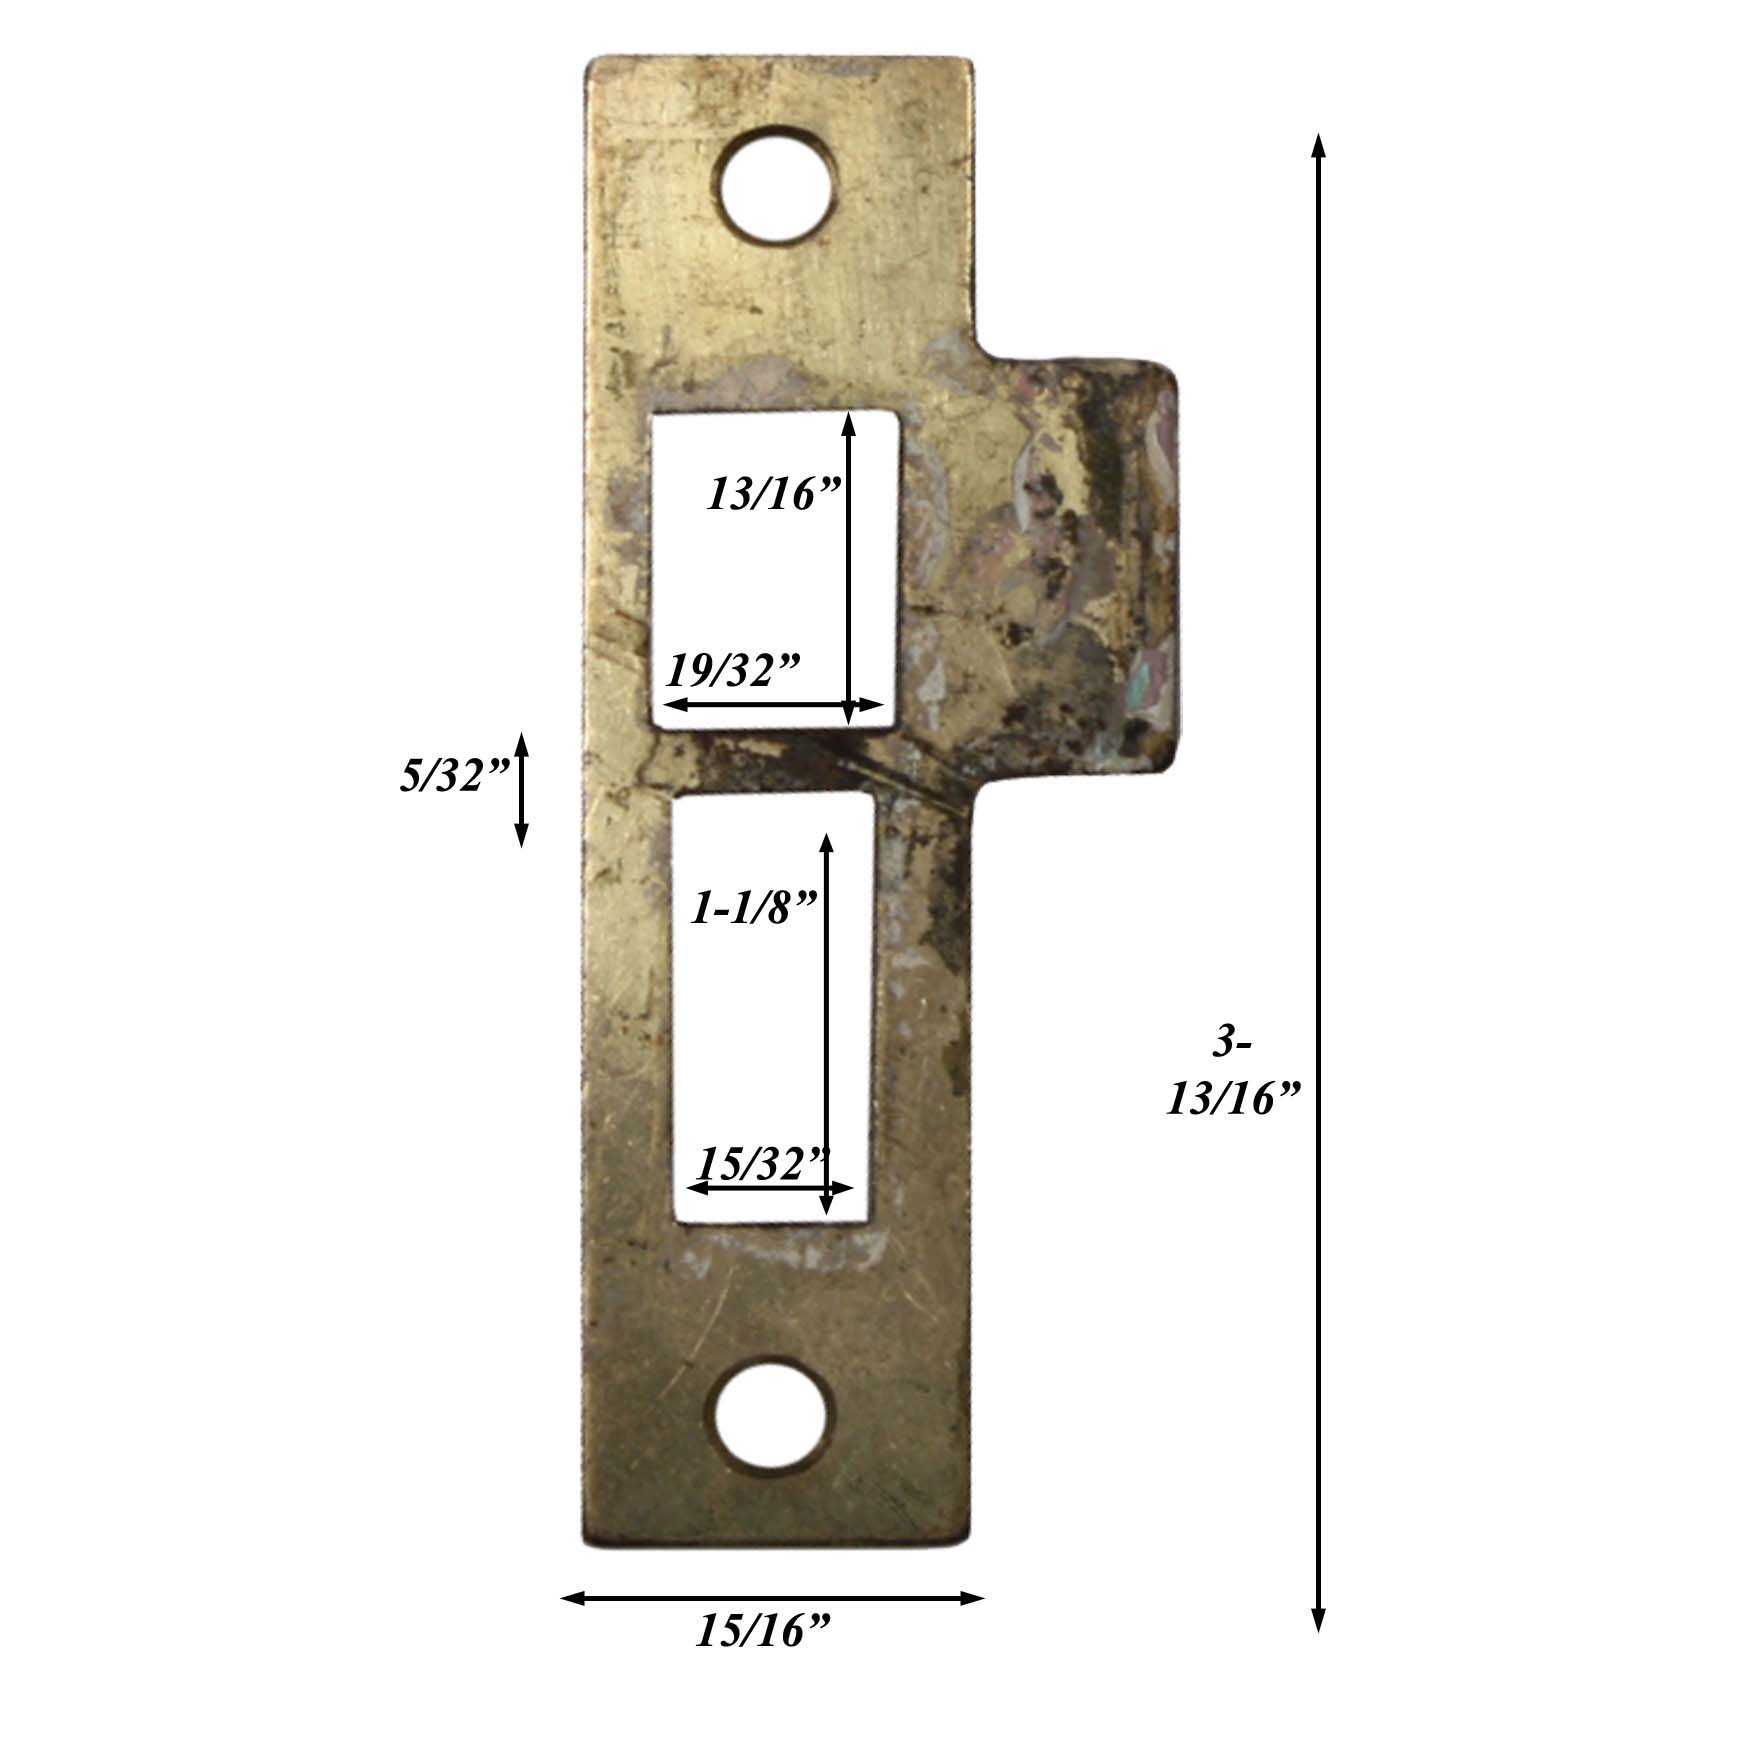 SOLD Antique Strike Plates for Mortise Locks, 5/32” Spacing-40640